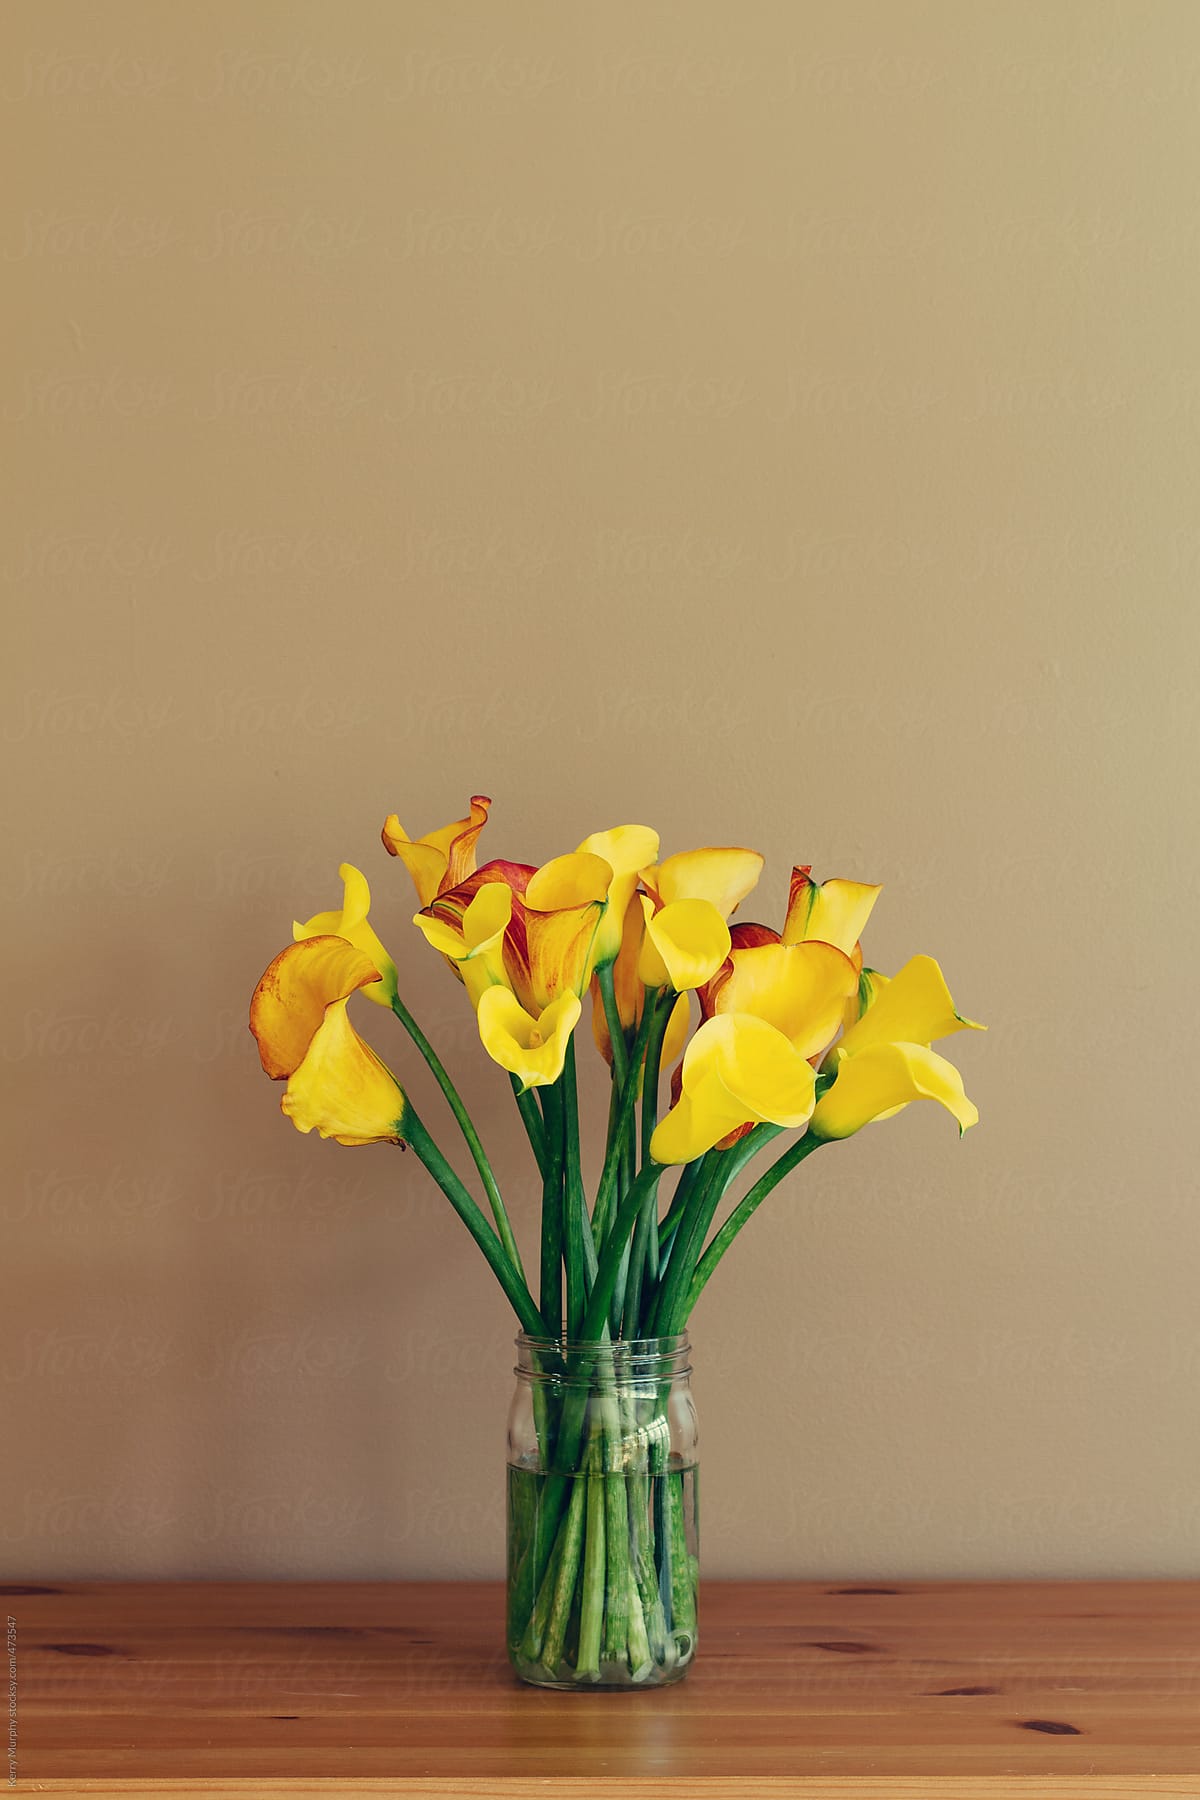 Yellow calla lilies in glass jar on wooden table